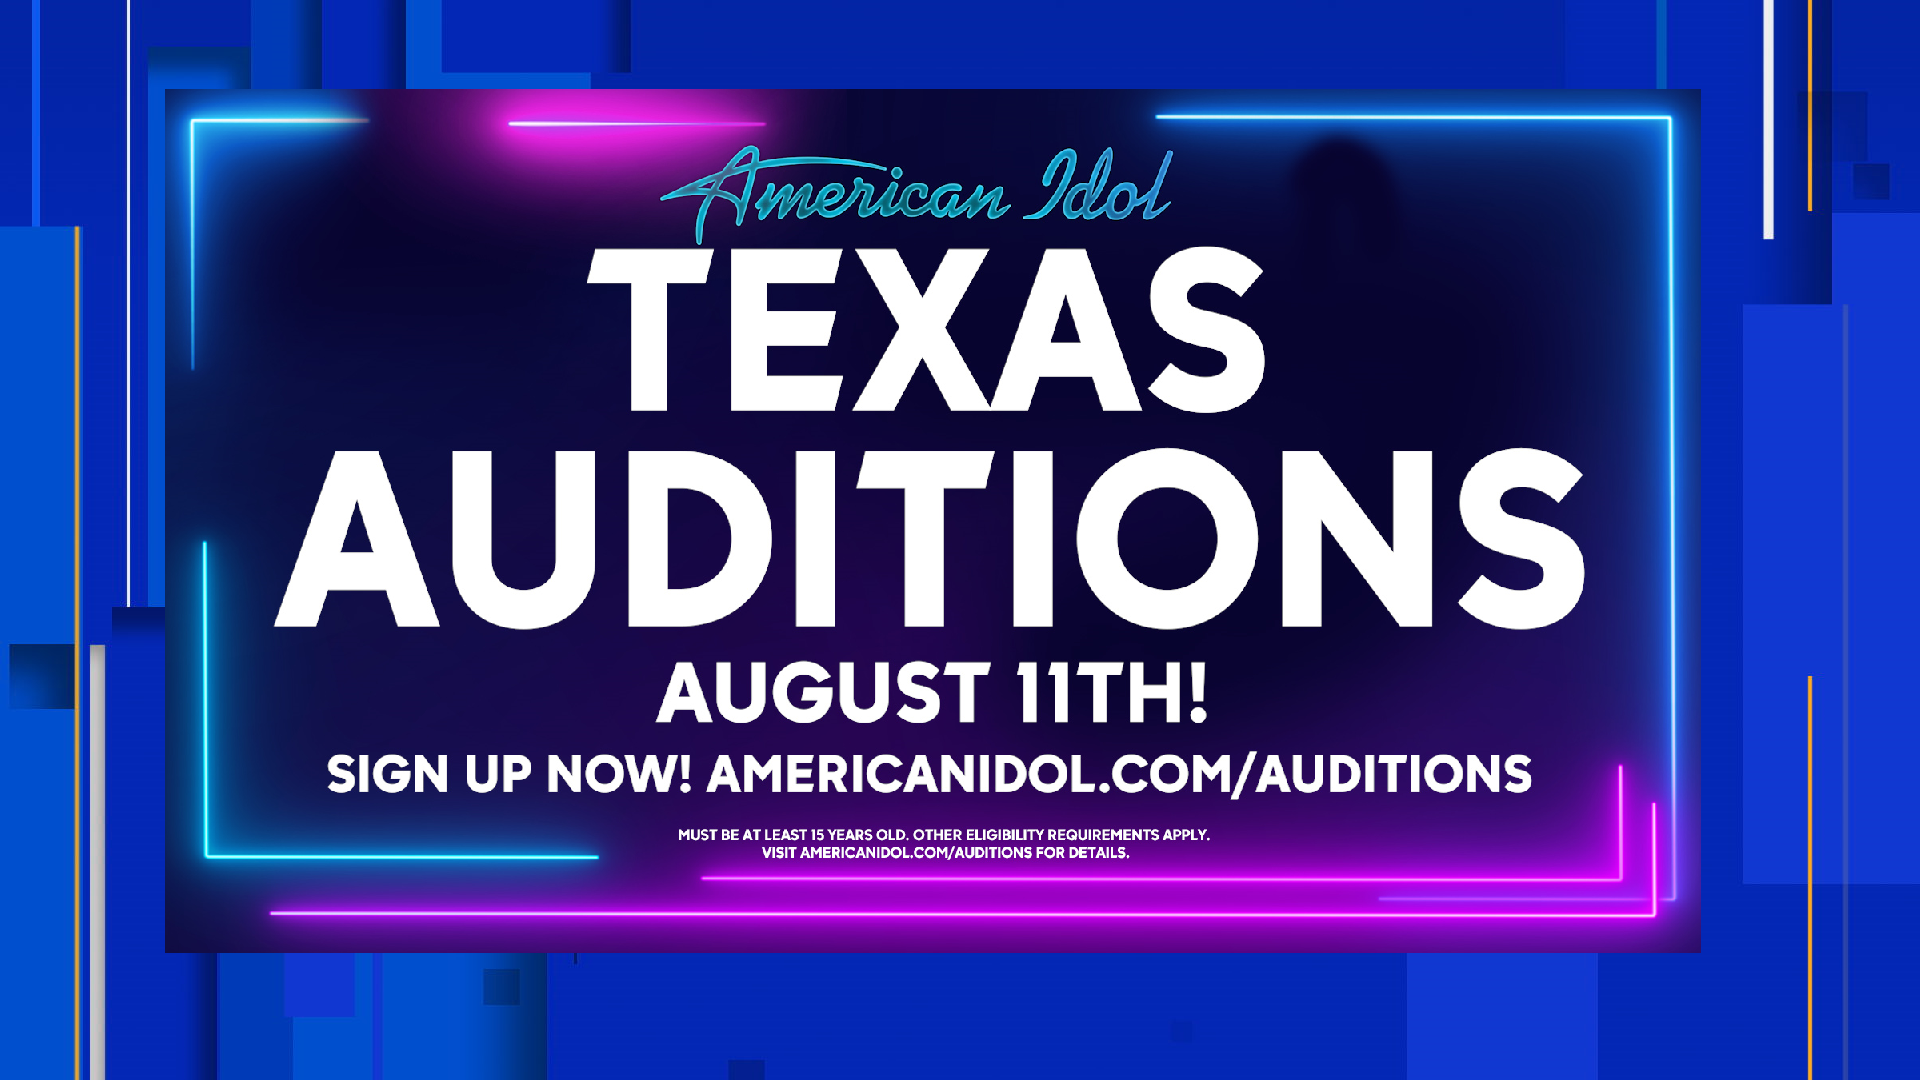 What you need to know about the American Idol Texas Auditions coming up on  Aug. 11